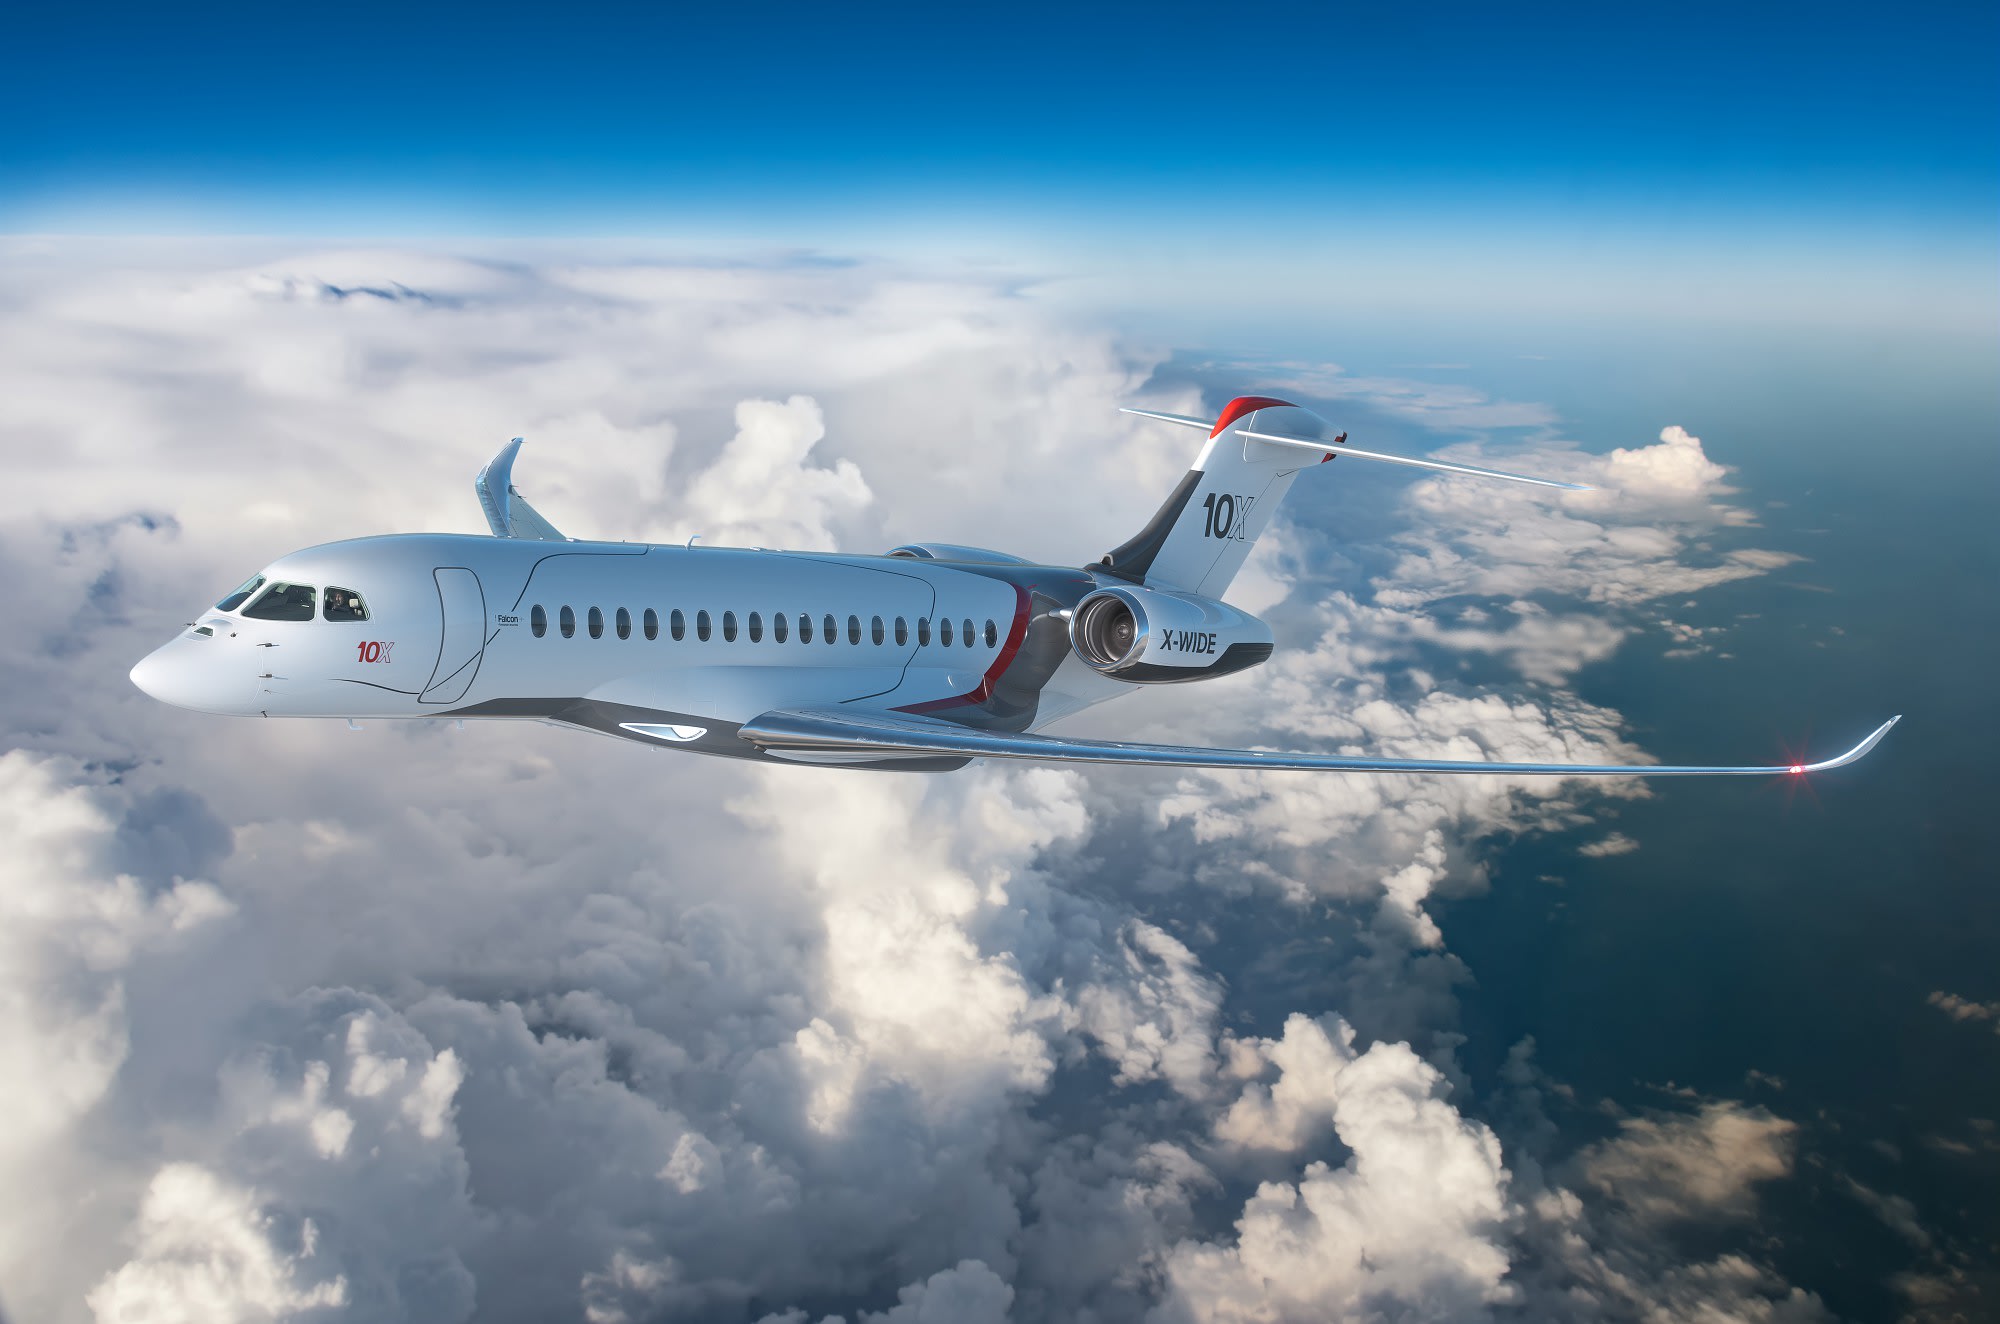 Dassault Aviation Launches Falcon 10X, featuring Industry's Largest Cabin  and Most Advanced Technology on a Business Jet - Press kits